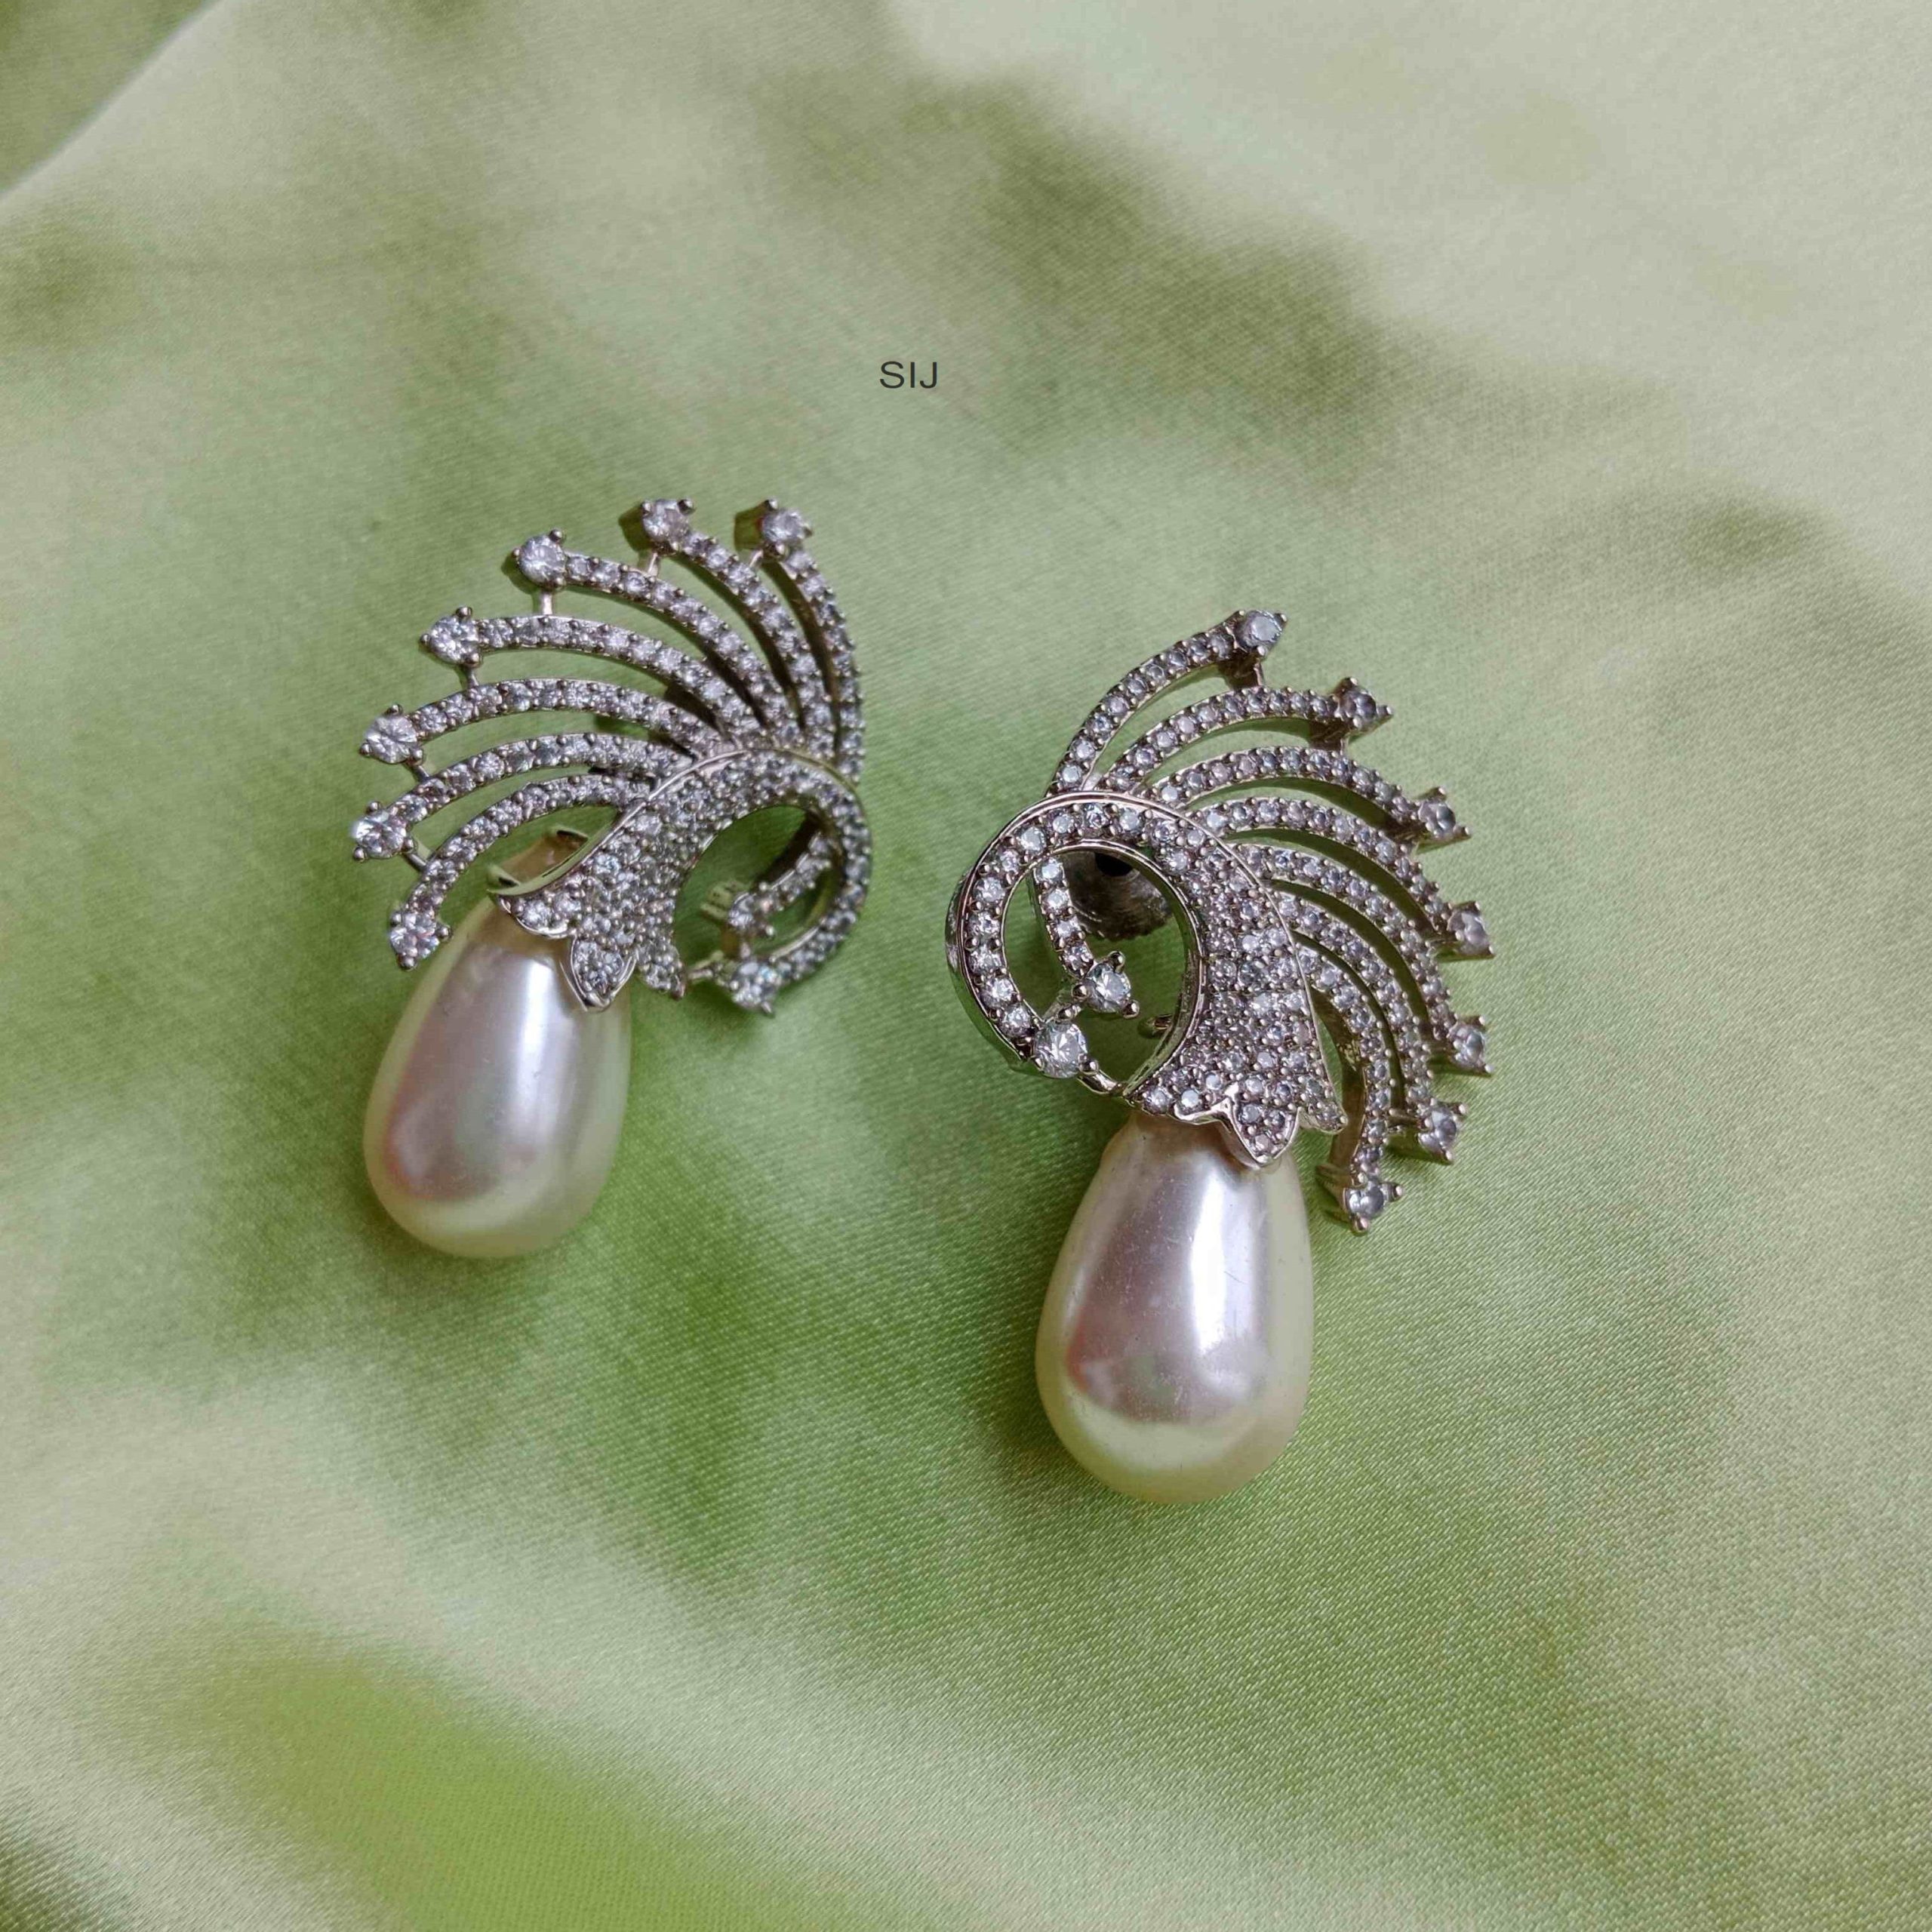 Peacock Design AD Stones Earrings with Pearl Drop